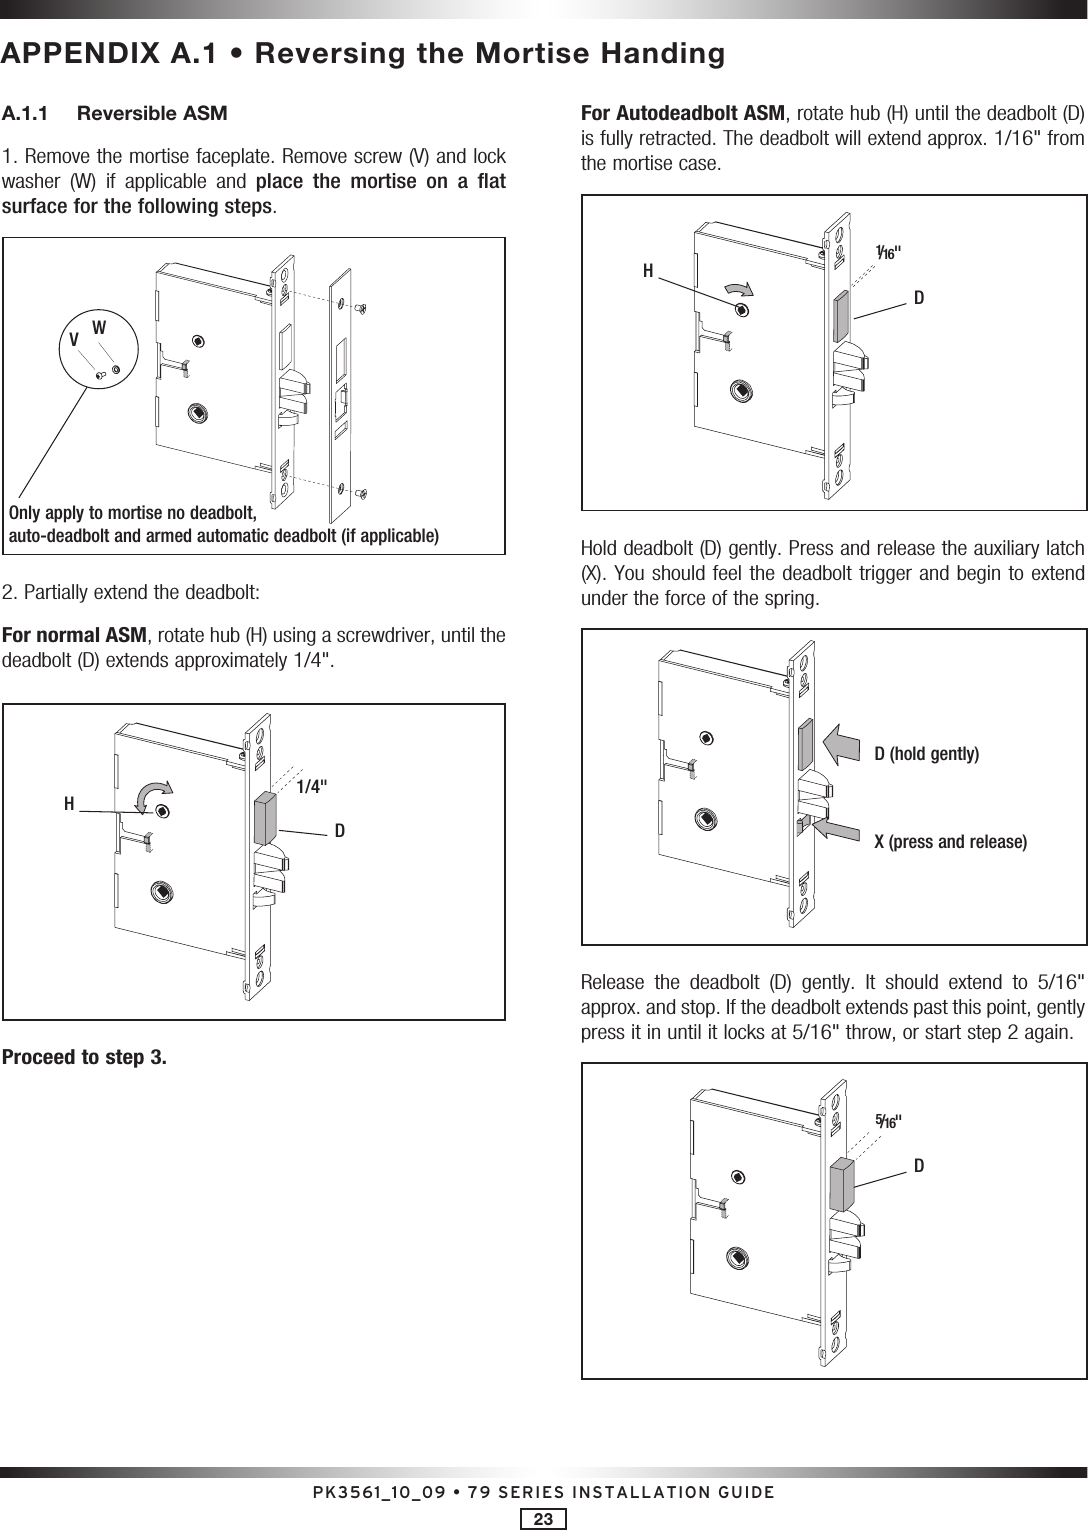 PK3561_10_09 • 79 SERIES INSTALLATION GUIDE23APPENDIX A.1 • Reversing the Mortise HandingA.1.1  Reversible ASM 1. Remove the mortise faceplate. Remove screw (V) and lock washer  (W)  if  applicable  and  place  the  mortise  on  a  flat surface for the following steps.WV2. Partially extend the deadbolt:For normal ASM, rotate hub (H) using a screwdriver, until the deadbolt (D) extends approximately 1/4&quot;.D1/4&quot;HProceed to step 3.For Autodeadbolt ASM, rotate hub (H) until the deadbolt (D) is fully retracted. The deadbolt will extend approx. 1/16&quot; from the mortise case.D1/16&quot;HHold deadbolt (D) gently. Press and release the auxiliary latch (X). You should feel the deadbolt trigger and begin to extend under the force of the spring.D (hold gently)X (press and release)Release  the  deadbolt  (D)  gently.  It  should  extend  to  5/16&quot; approx. and stop. If the deadbolt extends past this point, gently press it in until it locks at 5/16&quot; throw, or start step 2 again.D5/16&quot;Only apply to mortise no deadbolt,  auto-deadbolt and armed automatic deadbolt (if applicable)